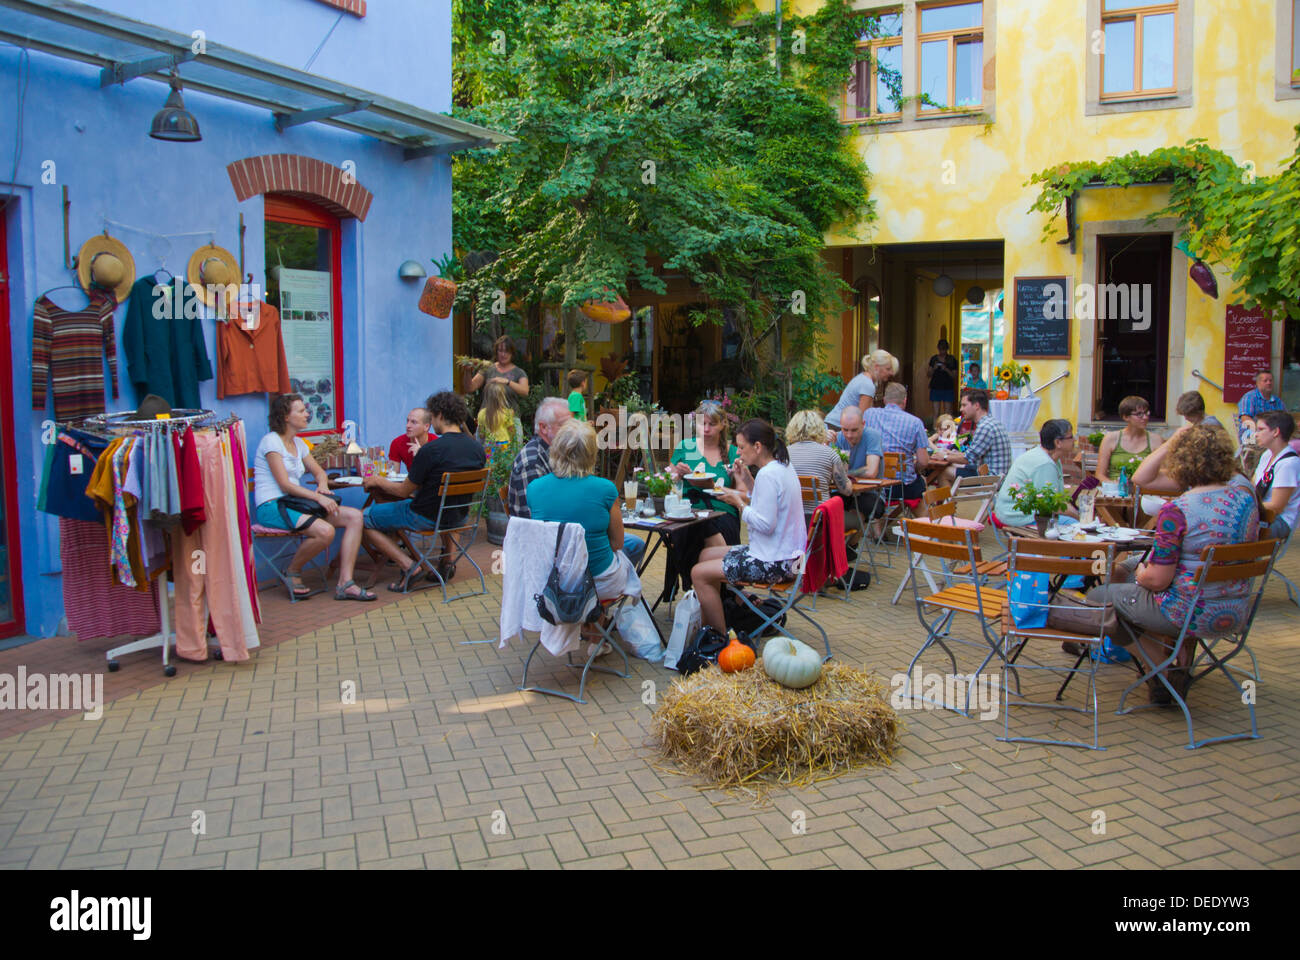 Cafe restaurant terraces Kunsthofpassage courtyard new town Dresden city eastern Germany central Europe Stock Photo